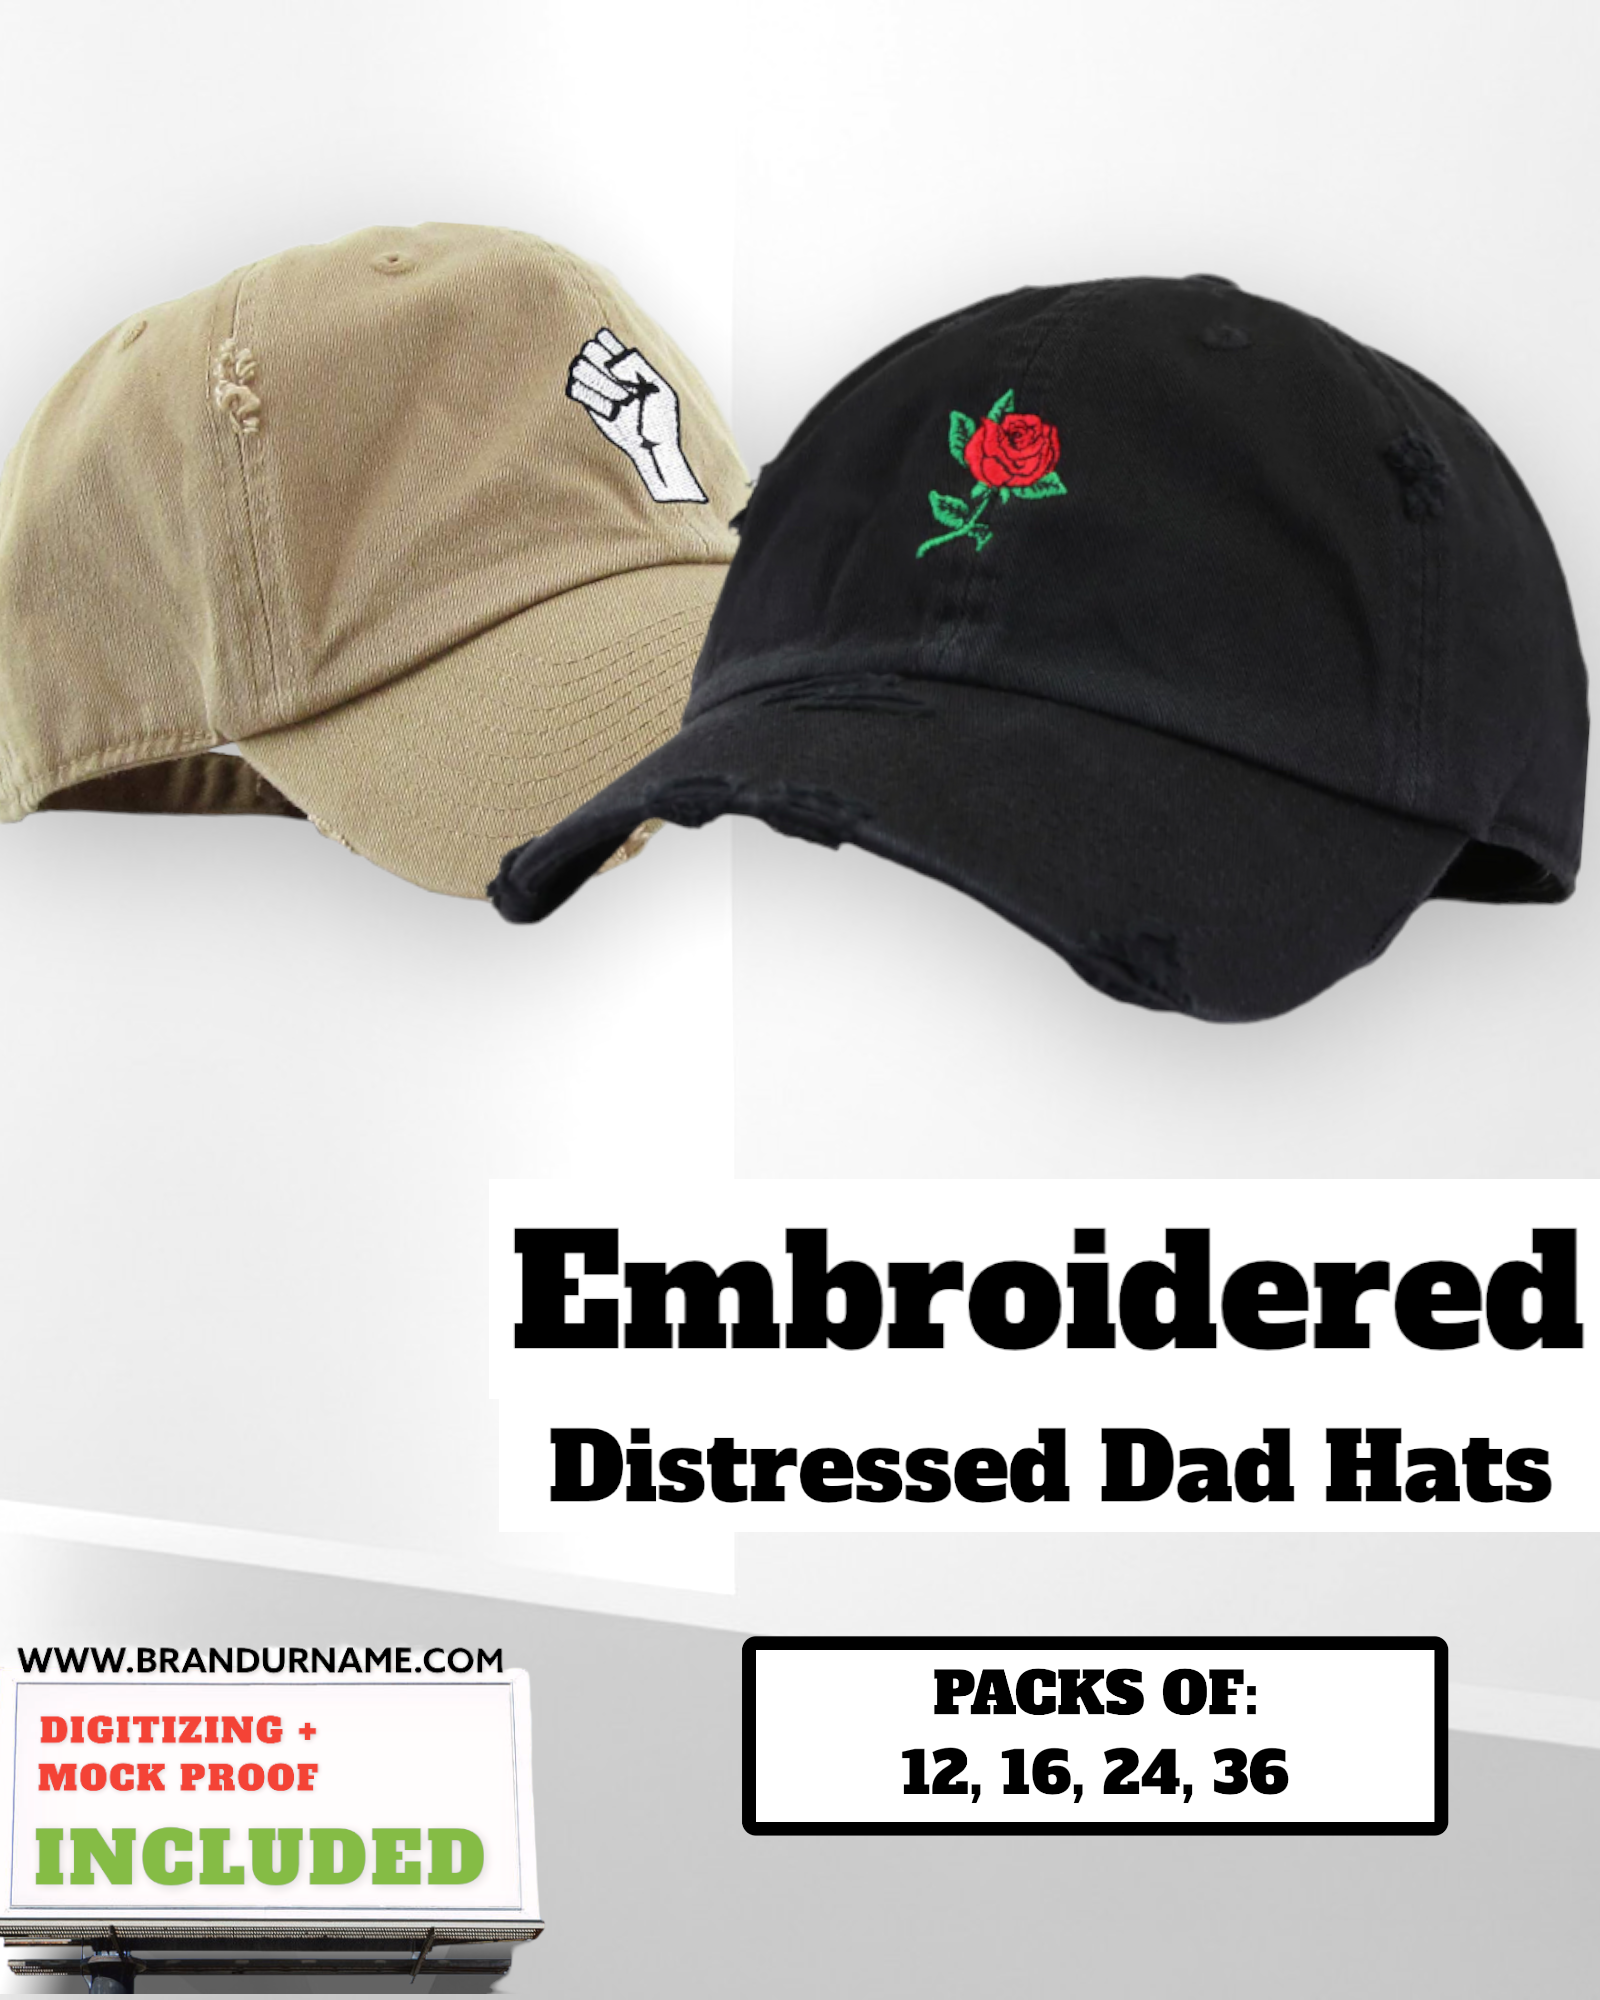 Custom hats, Branded headwear, Decorate my own hats, Embroidery for hats 